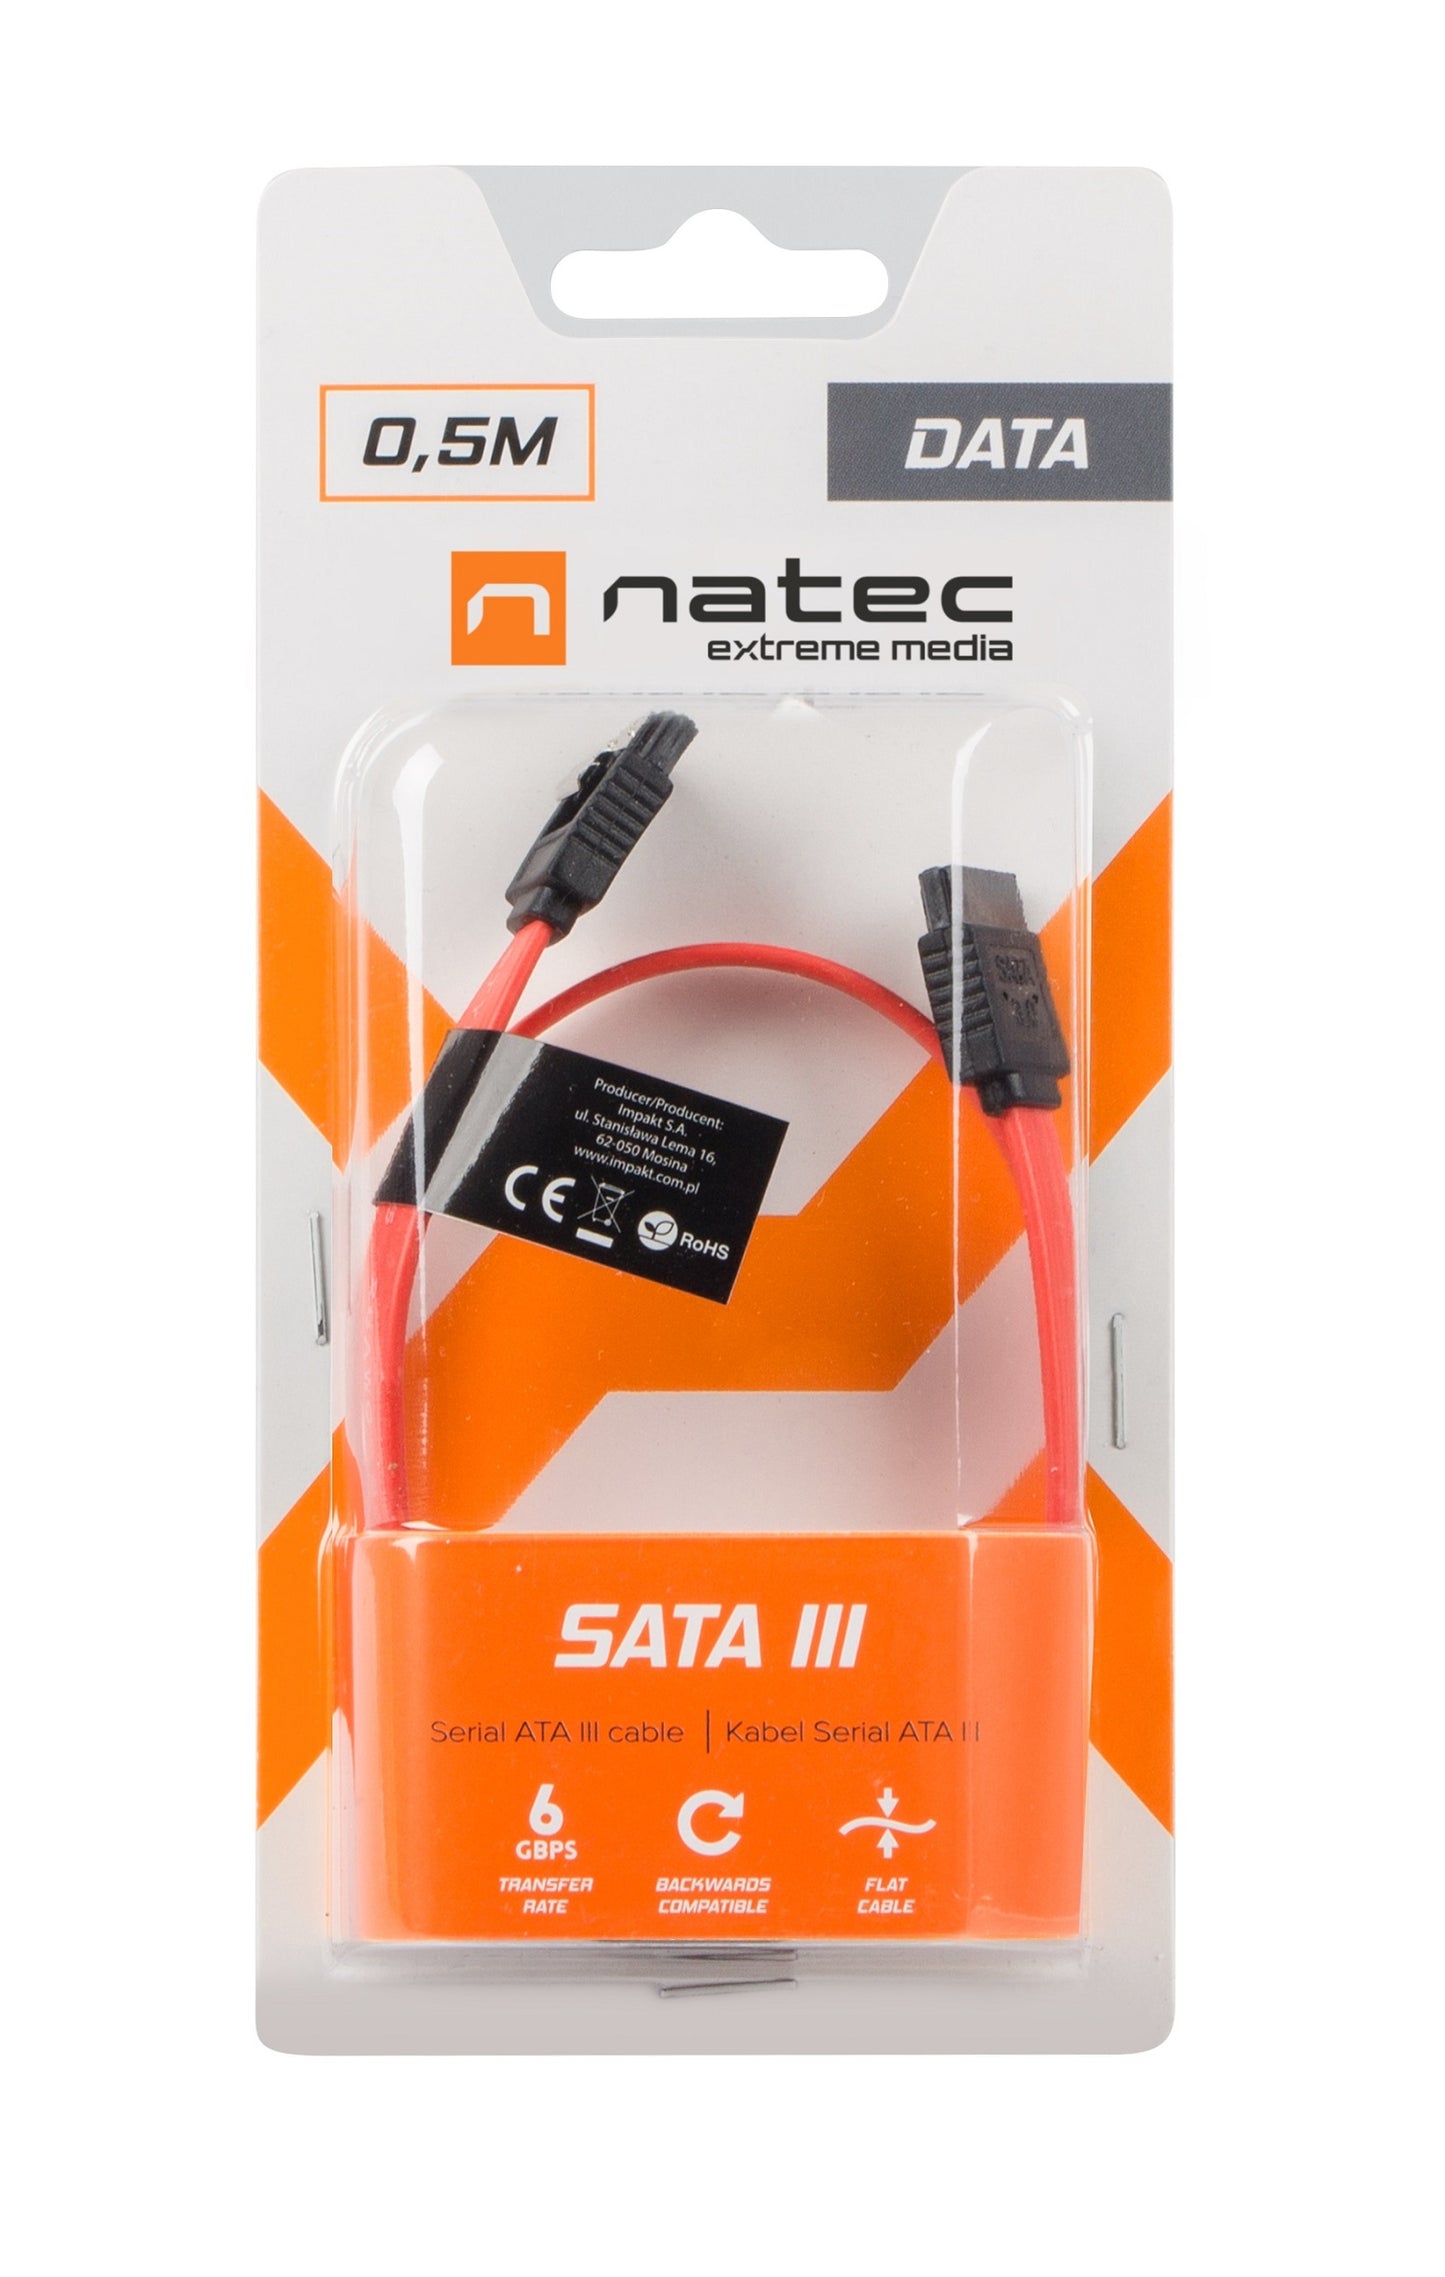 Natec NKA-0615 Sata III 6Gbps Cable 50cm Red Blister